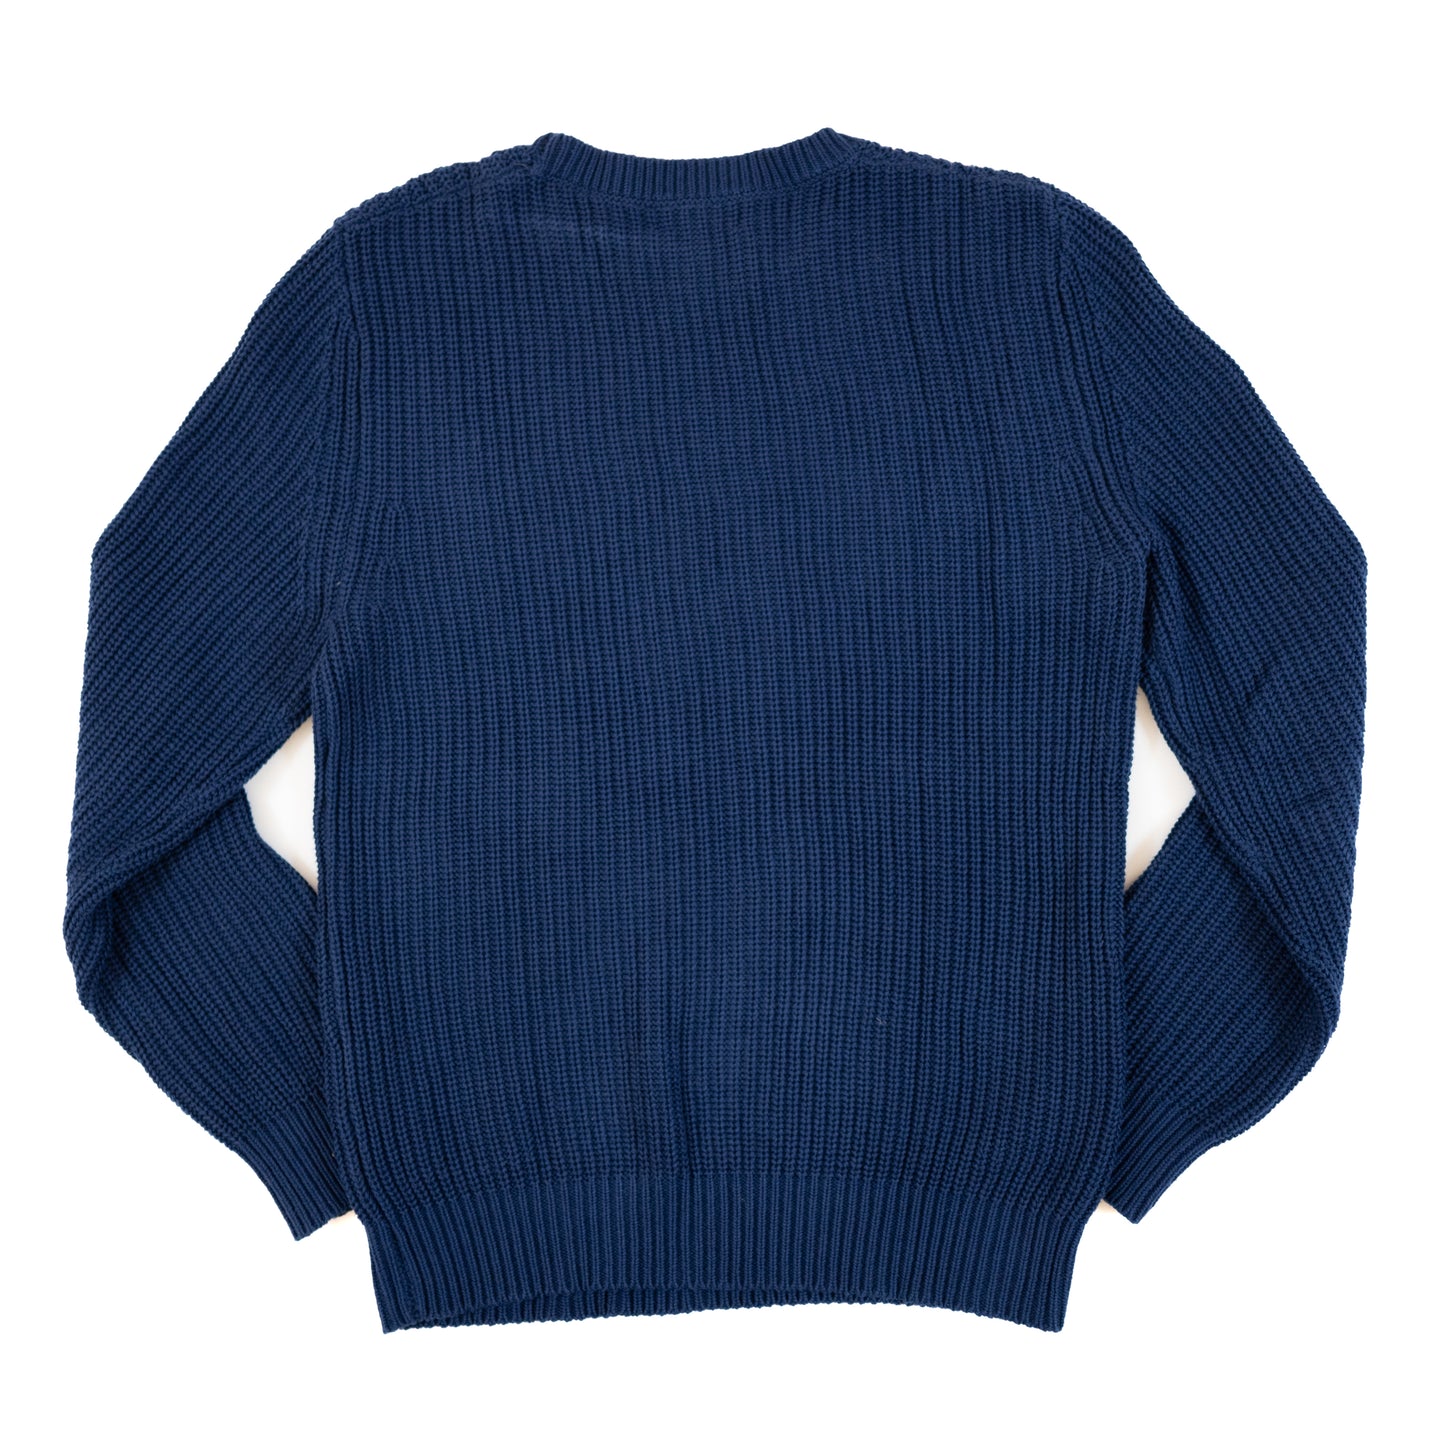 A.P.C Knit Navy Sweater